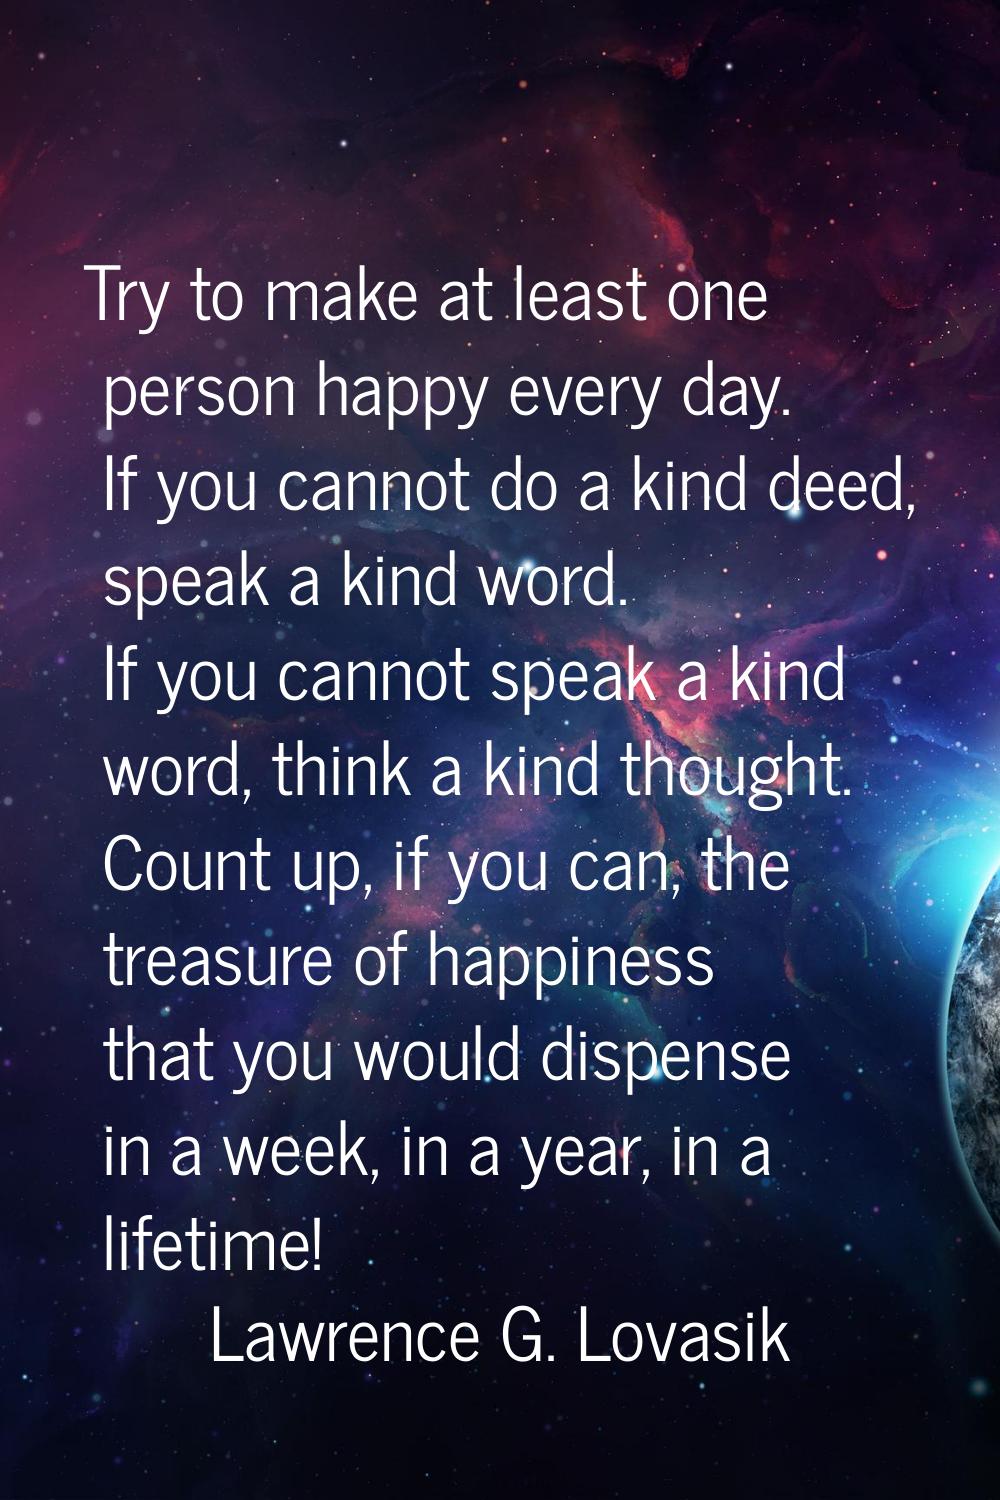 Try to make at least one person happy every day. If you cannot do a kind deed, speak a kind word. I